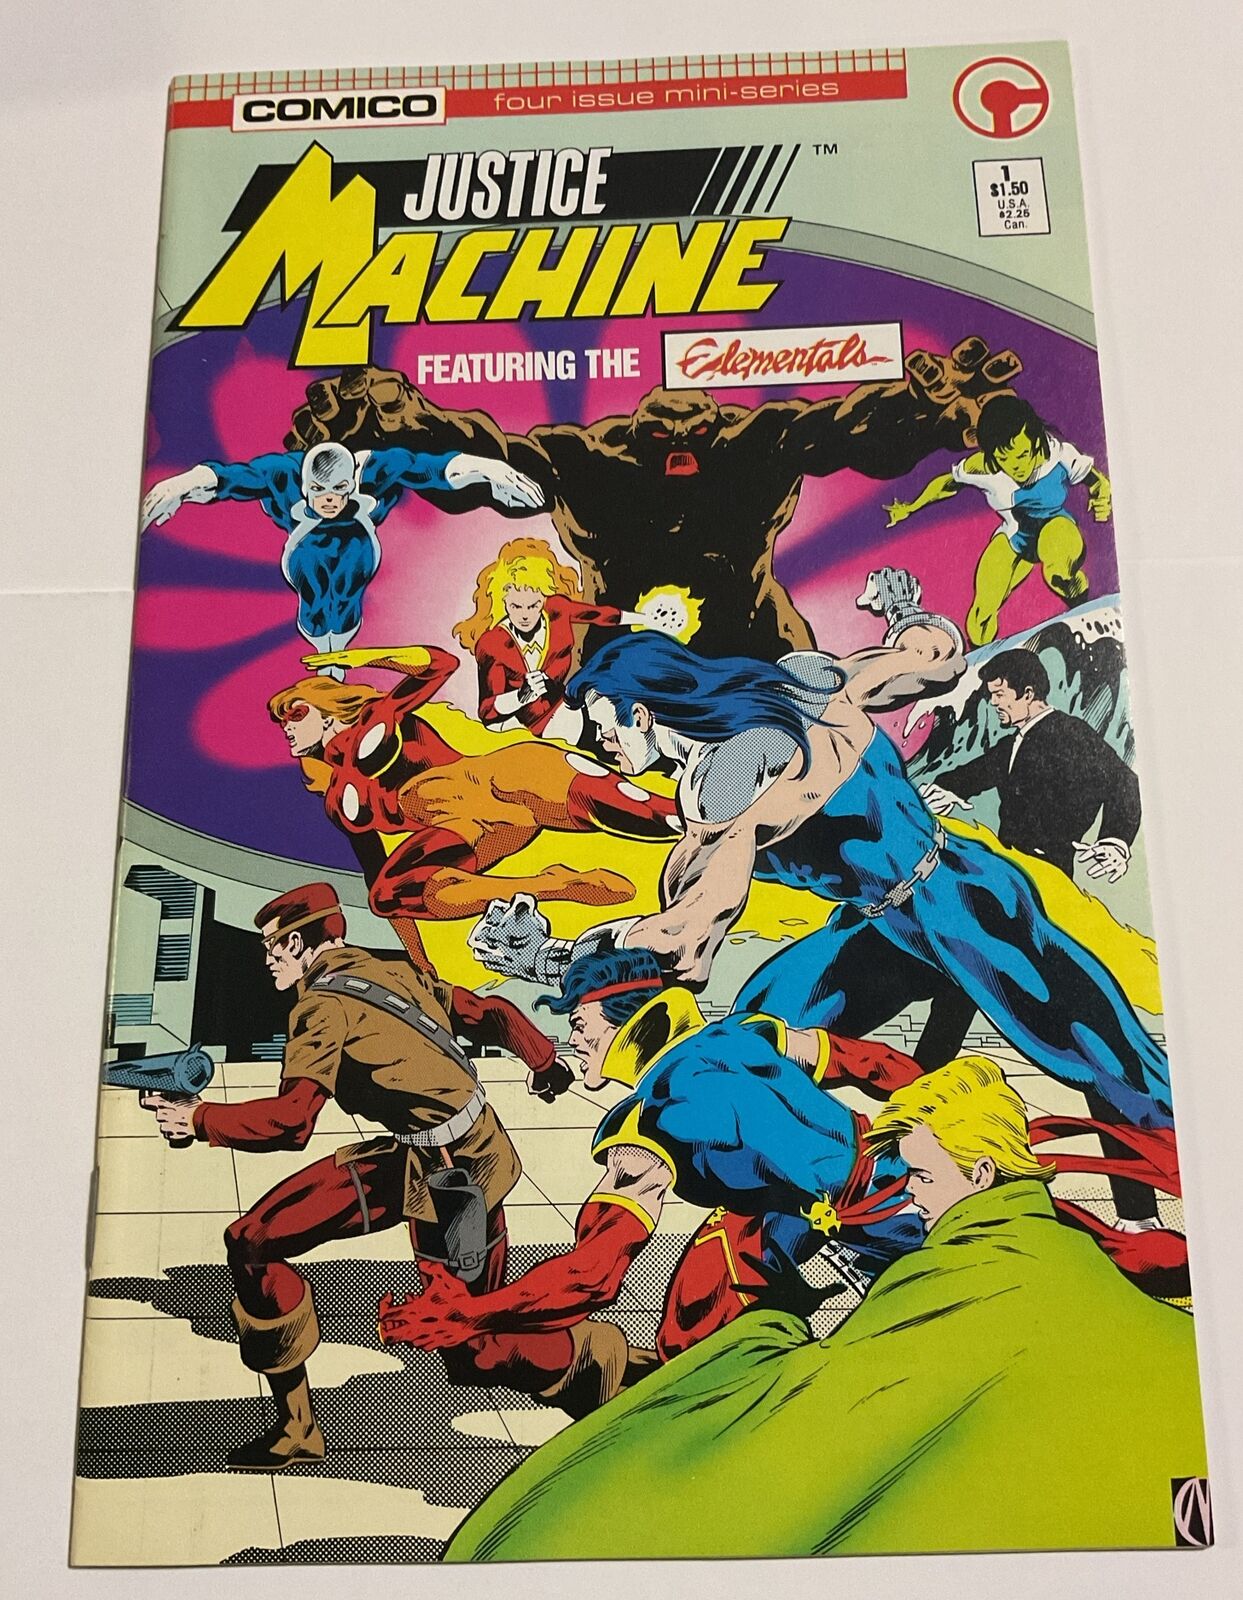 Vintage Justice Machine Featuring The Elementals #1 NM Comico 1986 HIGH GRADE